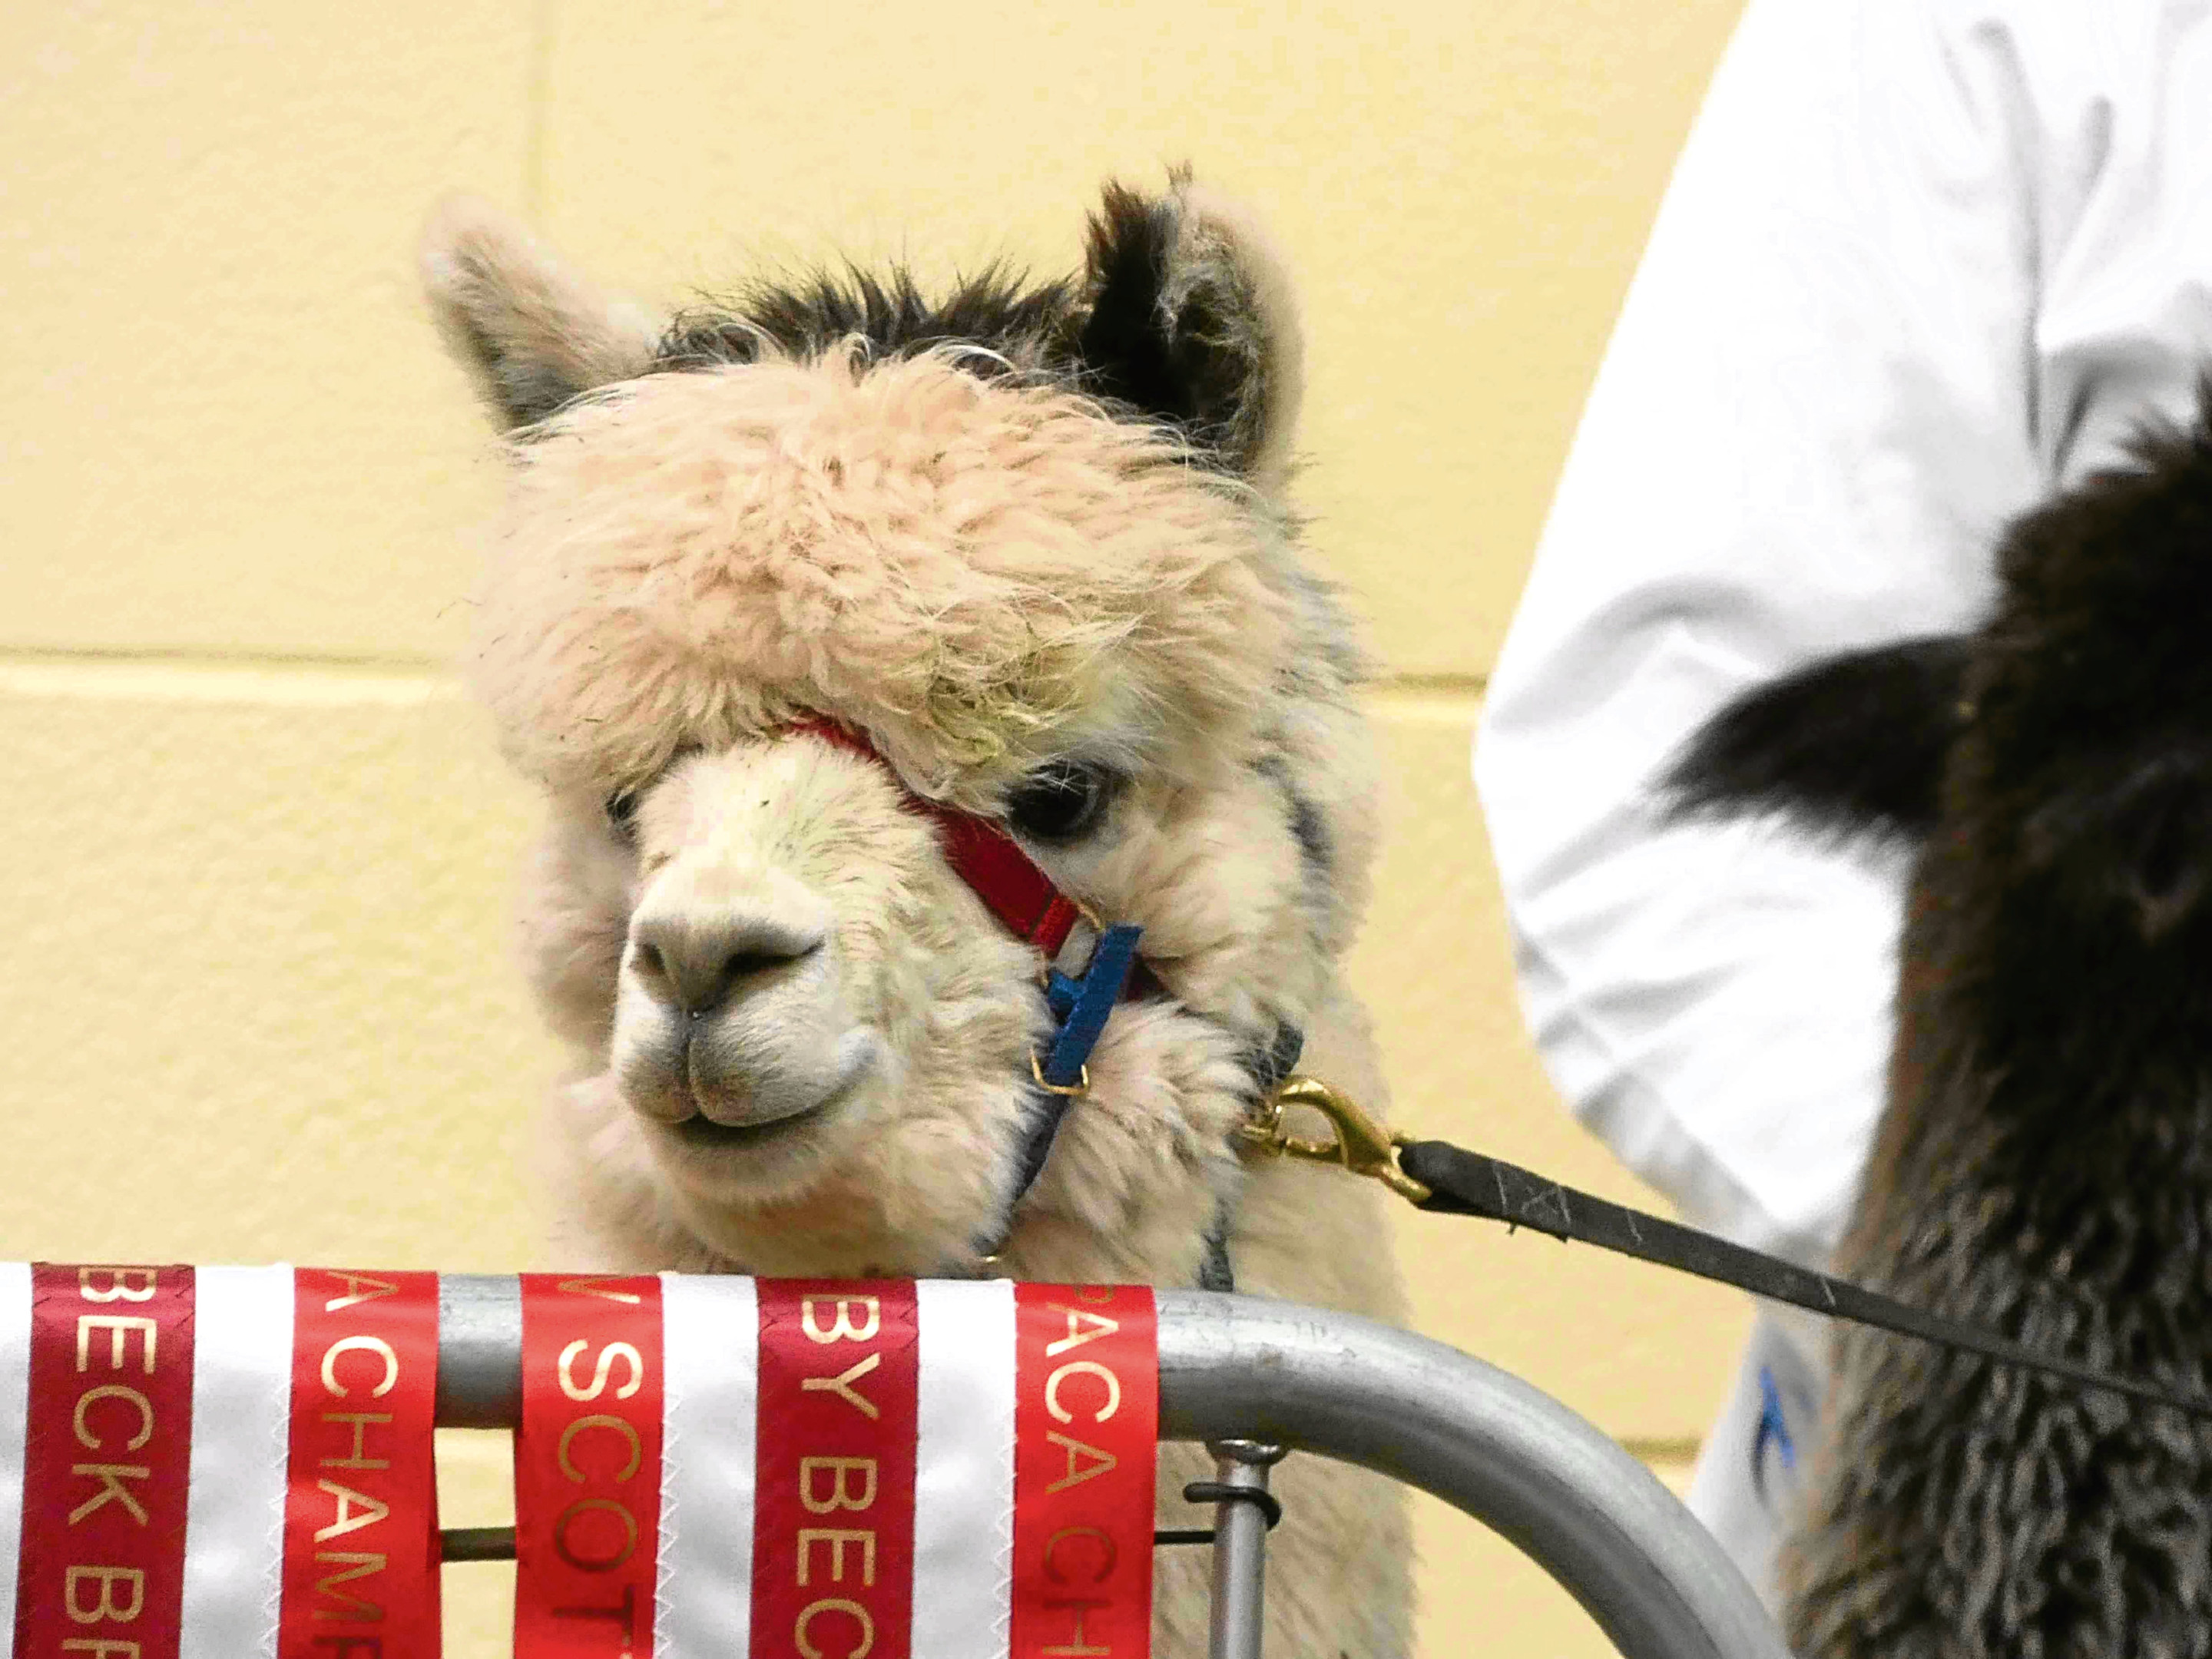 More than 100 alpacas are entered for the contest.